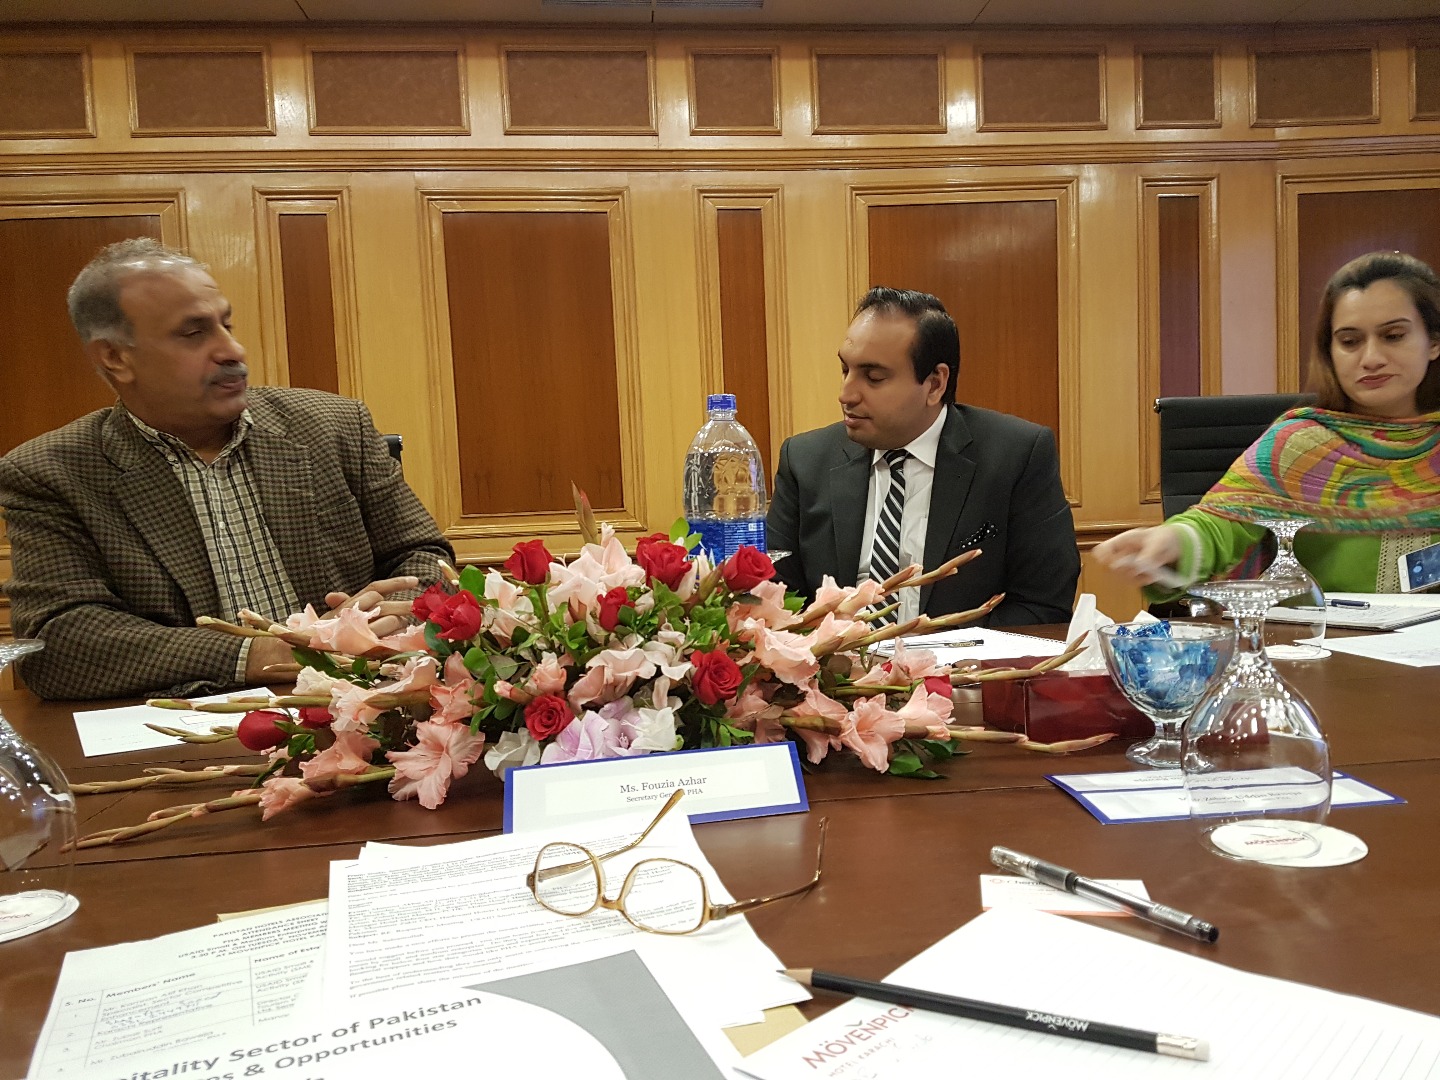 PHA hosted another focused group discussions meeting on request of USAID Small and Medium Enterprise